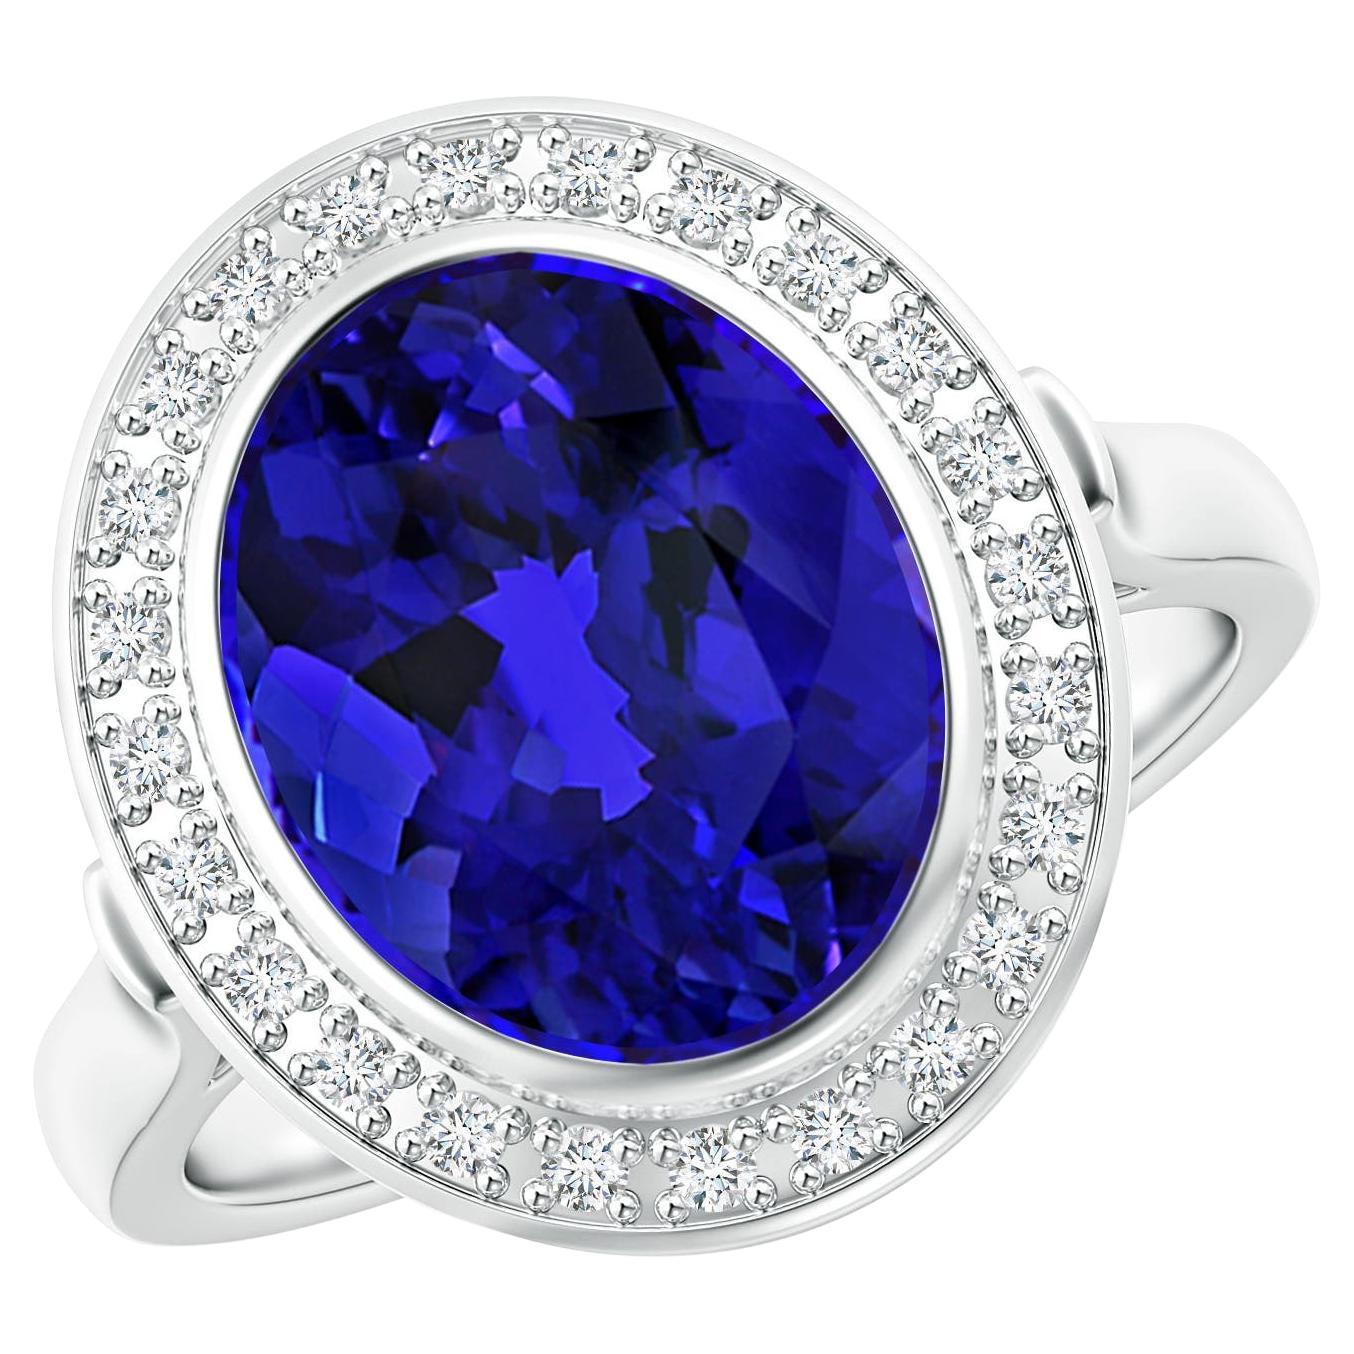 For Sale:  Angara GIA Certified & Appraised Natural Tanzanite Halo Ring in White Gold